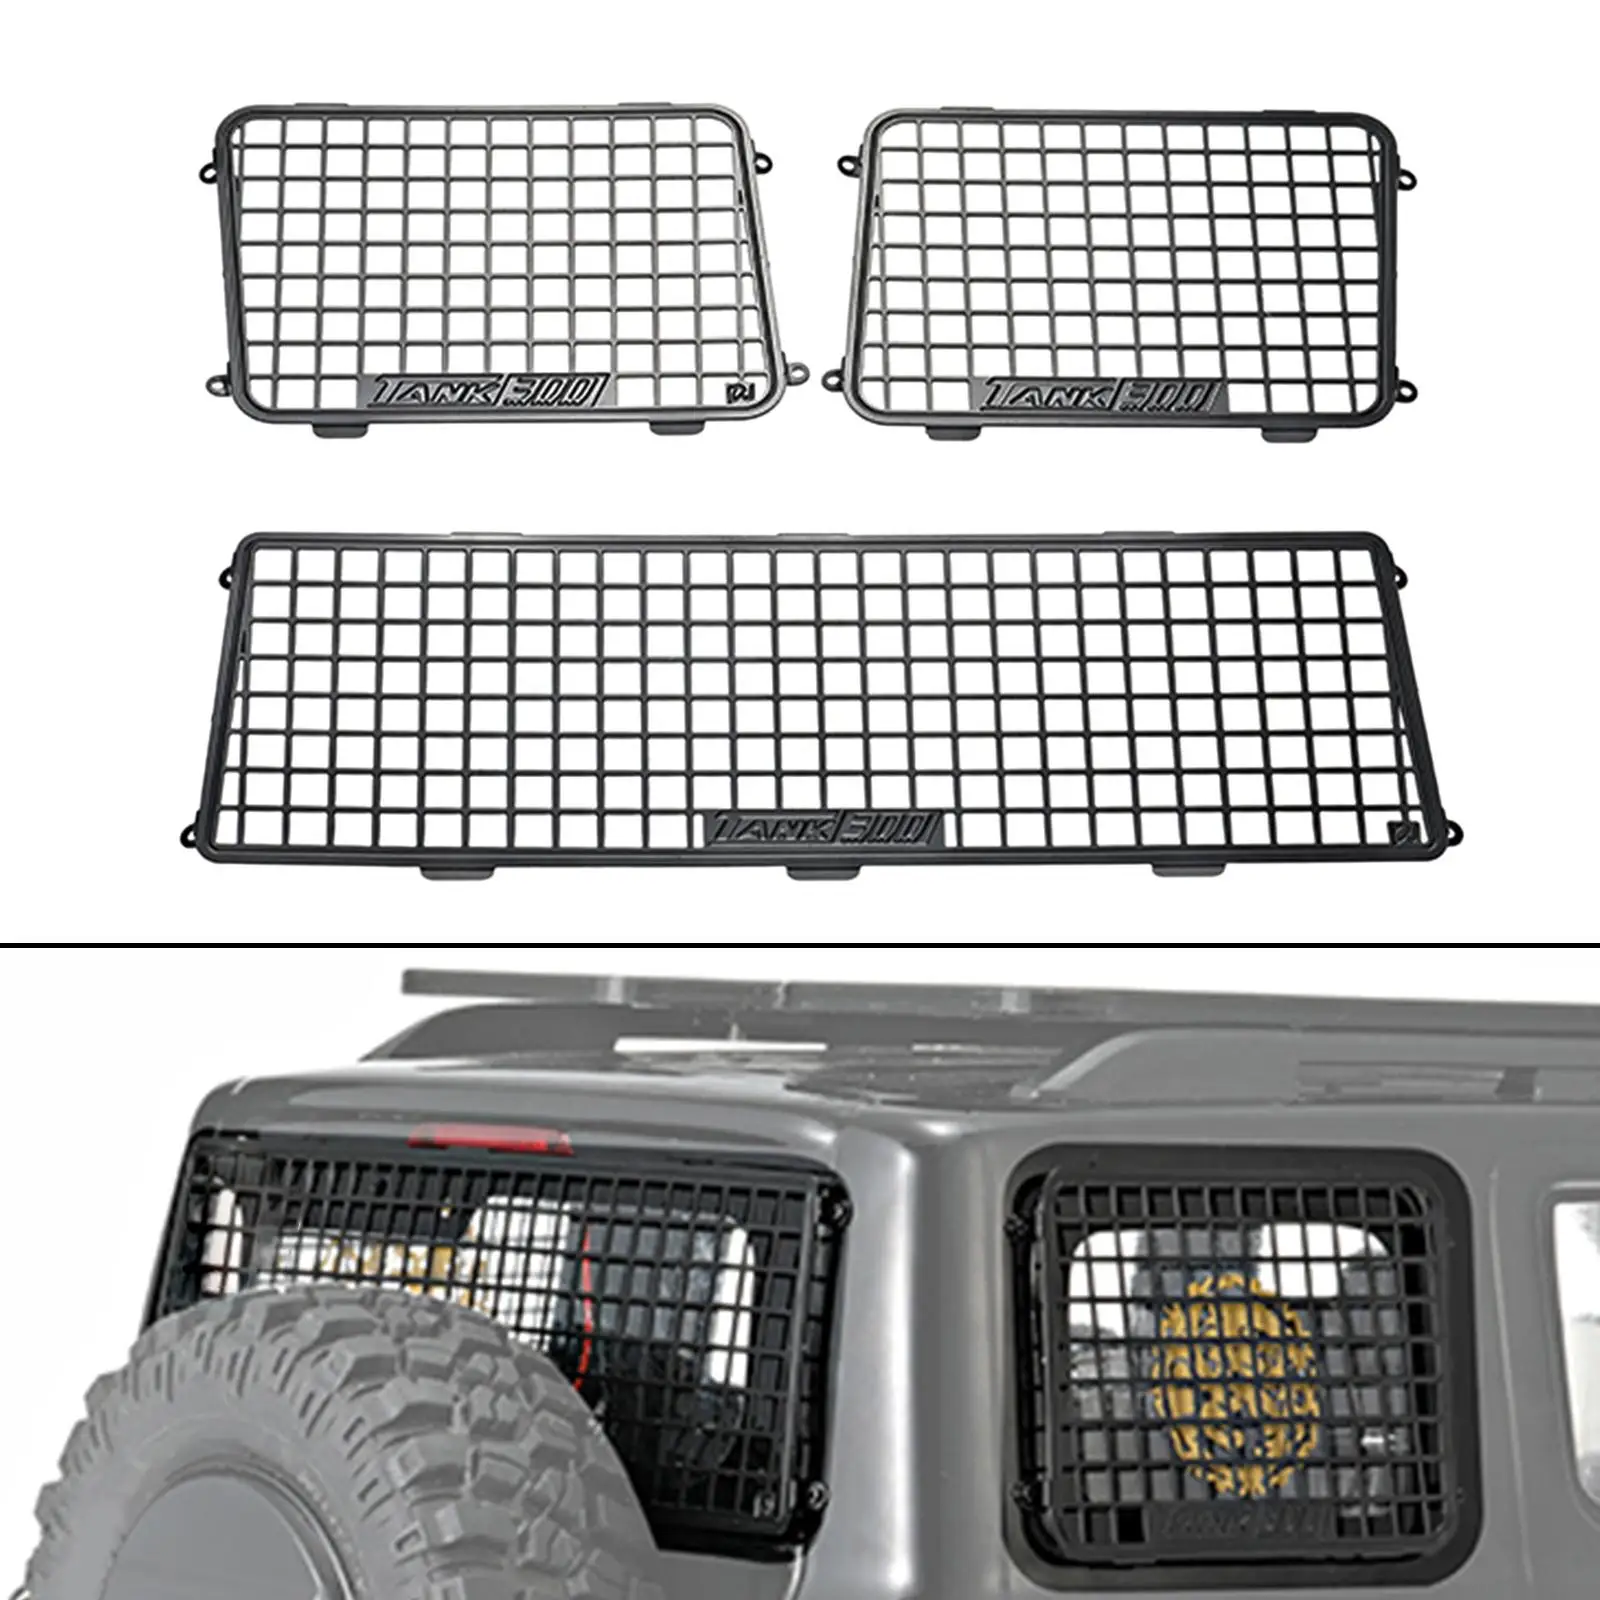 RC Car Upgrade Parts, Window Net Replace Decoration Accessaries for THOR Tank 300